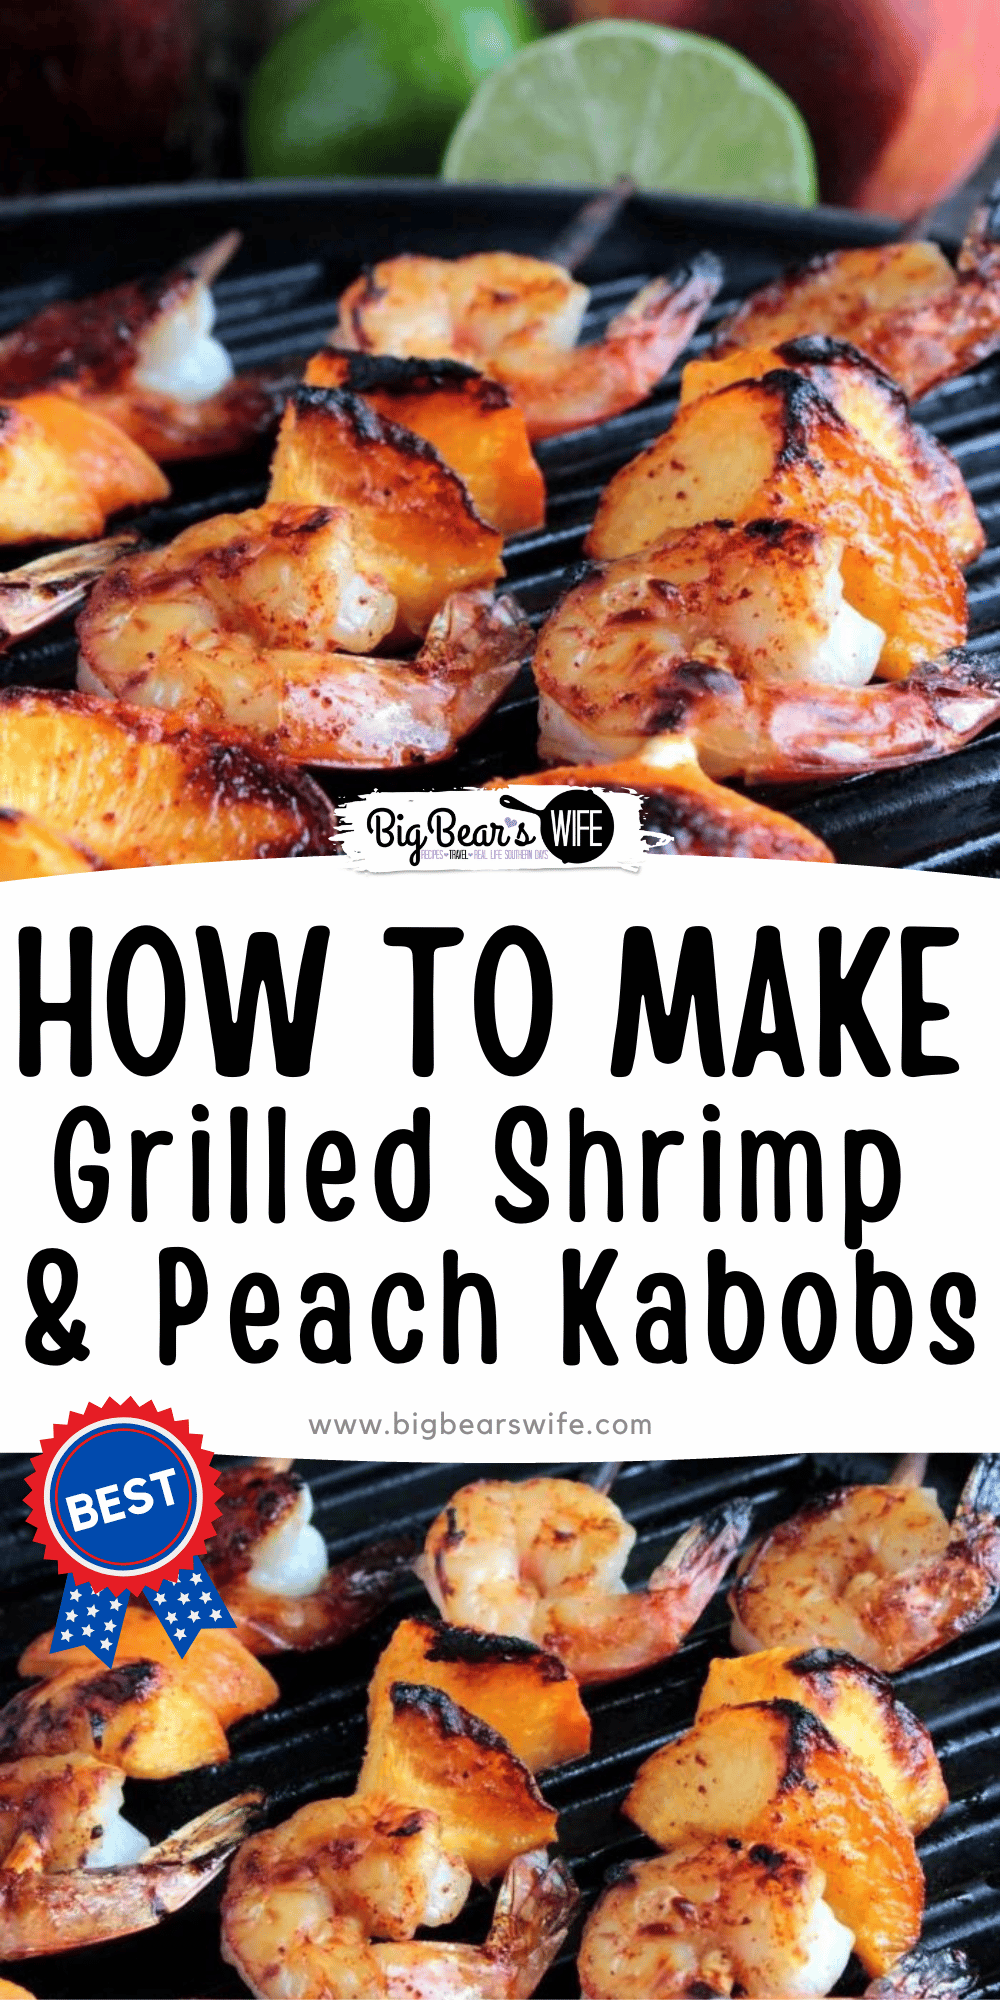 These kabobs are simple to toss together and they do cook pretty quickly. You can cook them on a charcoal or gas grill. They're also perfect grilled on a grill pan on top of the stove. via @bigbearswife